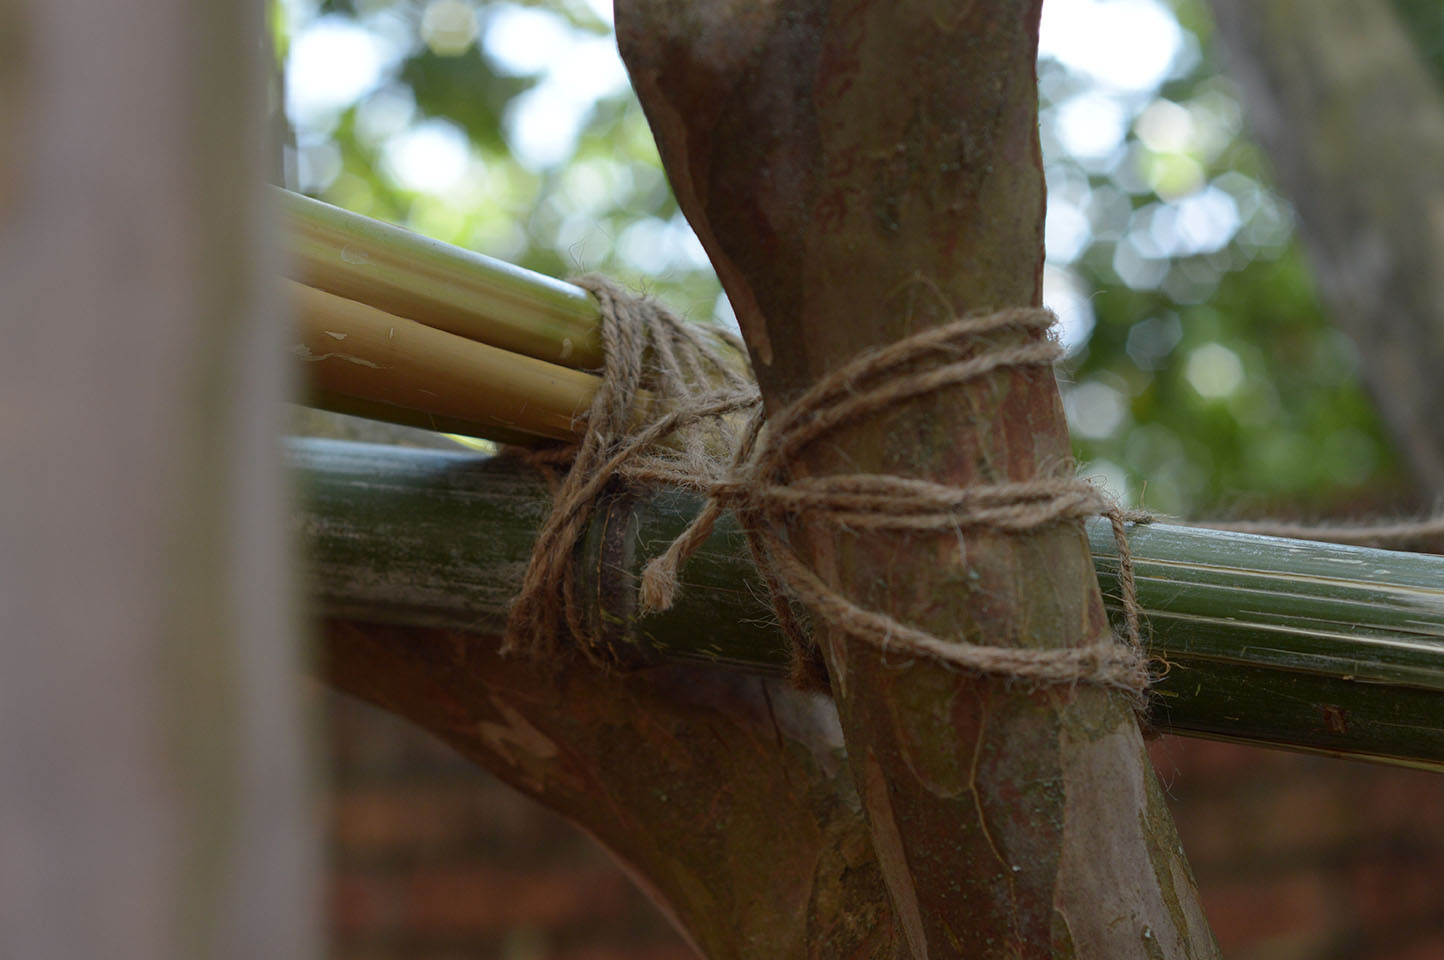 another close up of twine holding bamboo together to make shelter